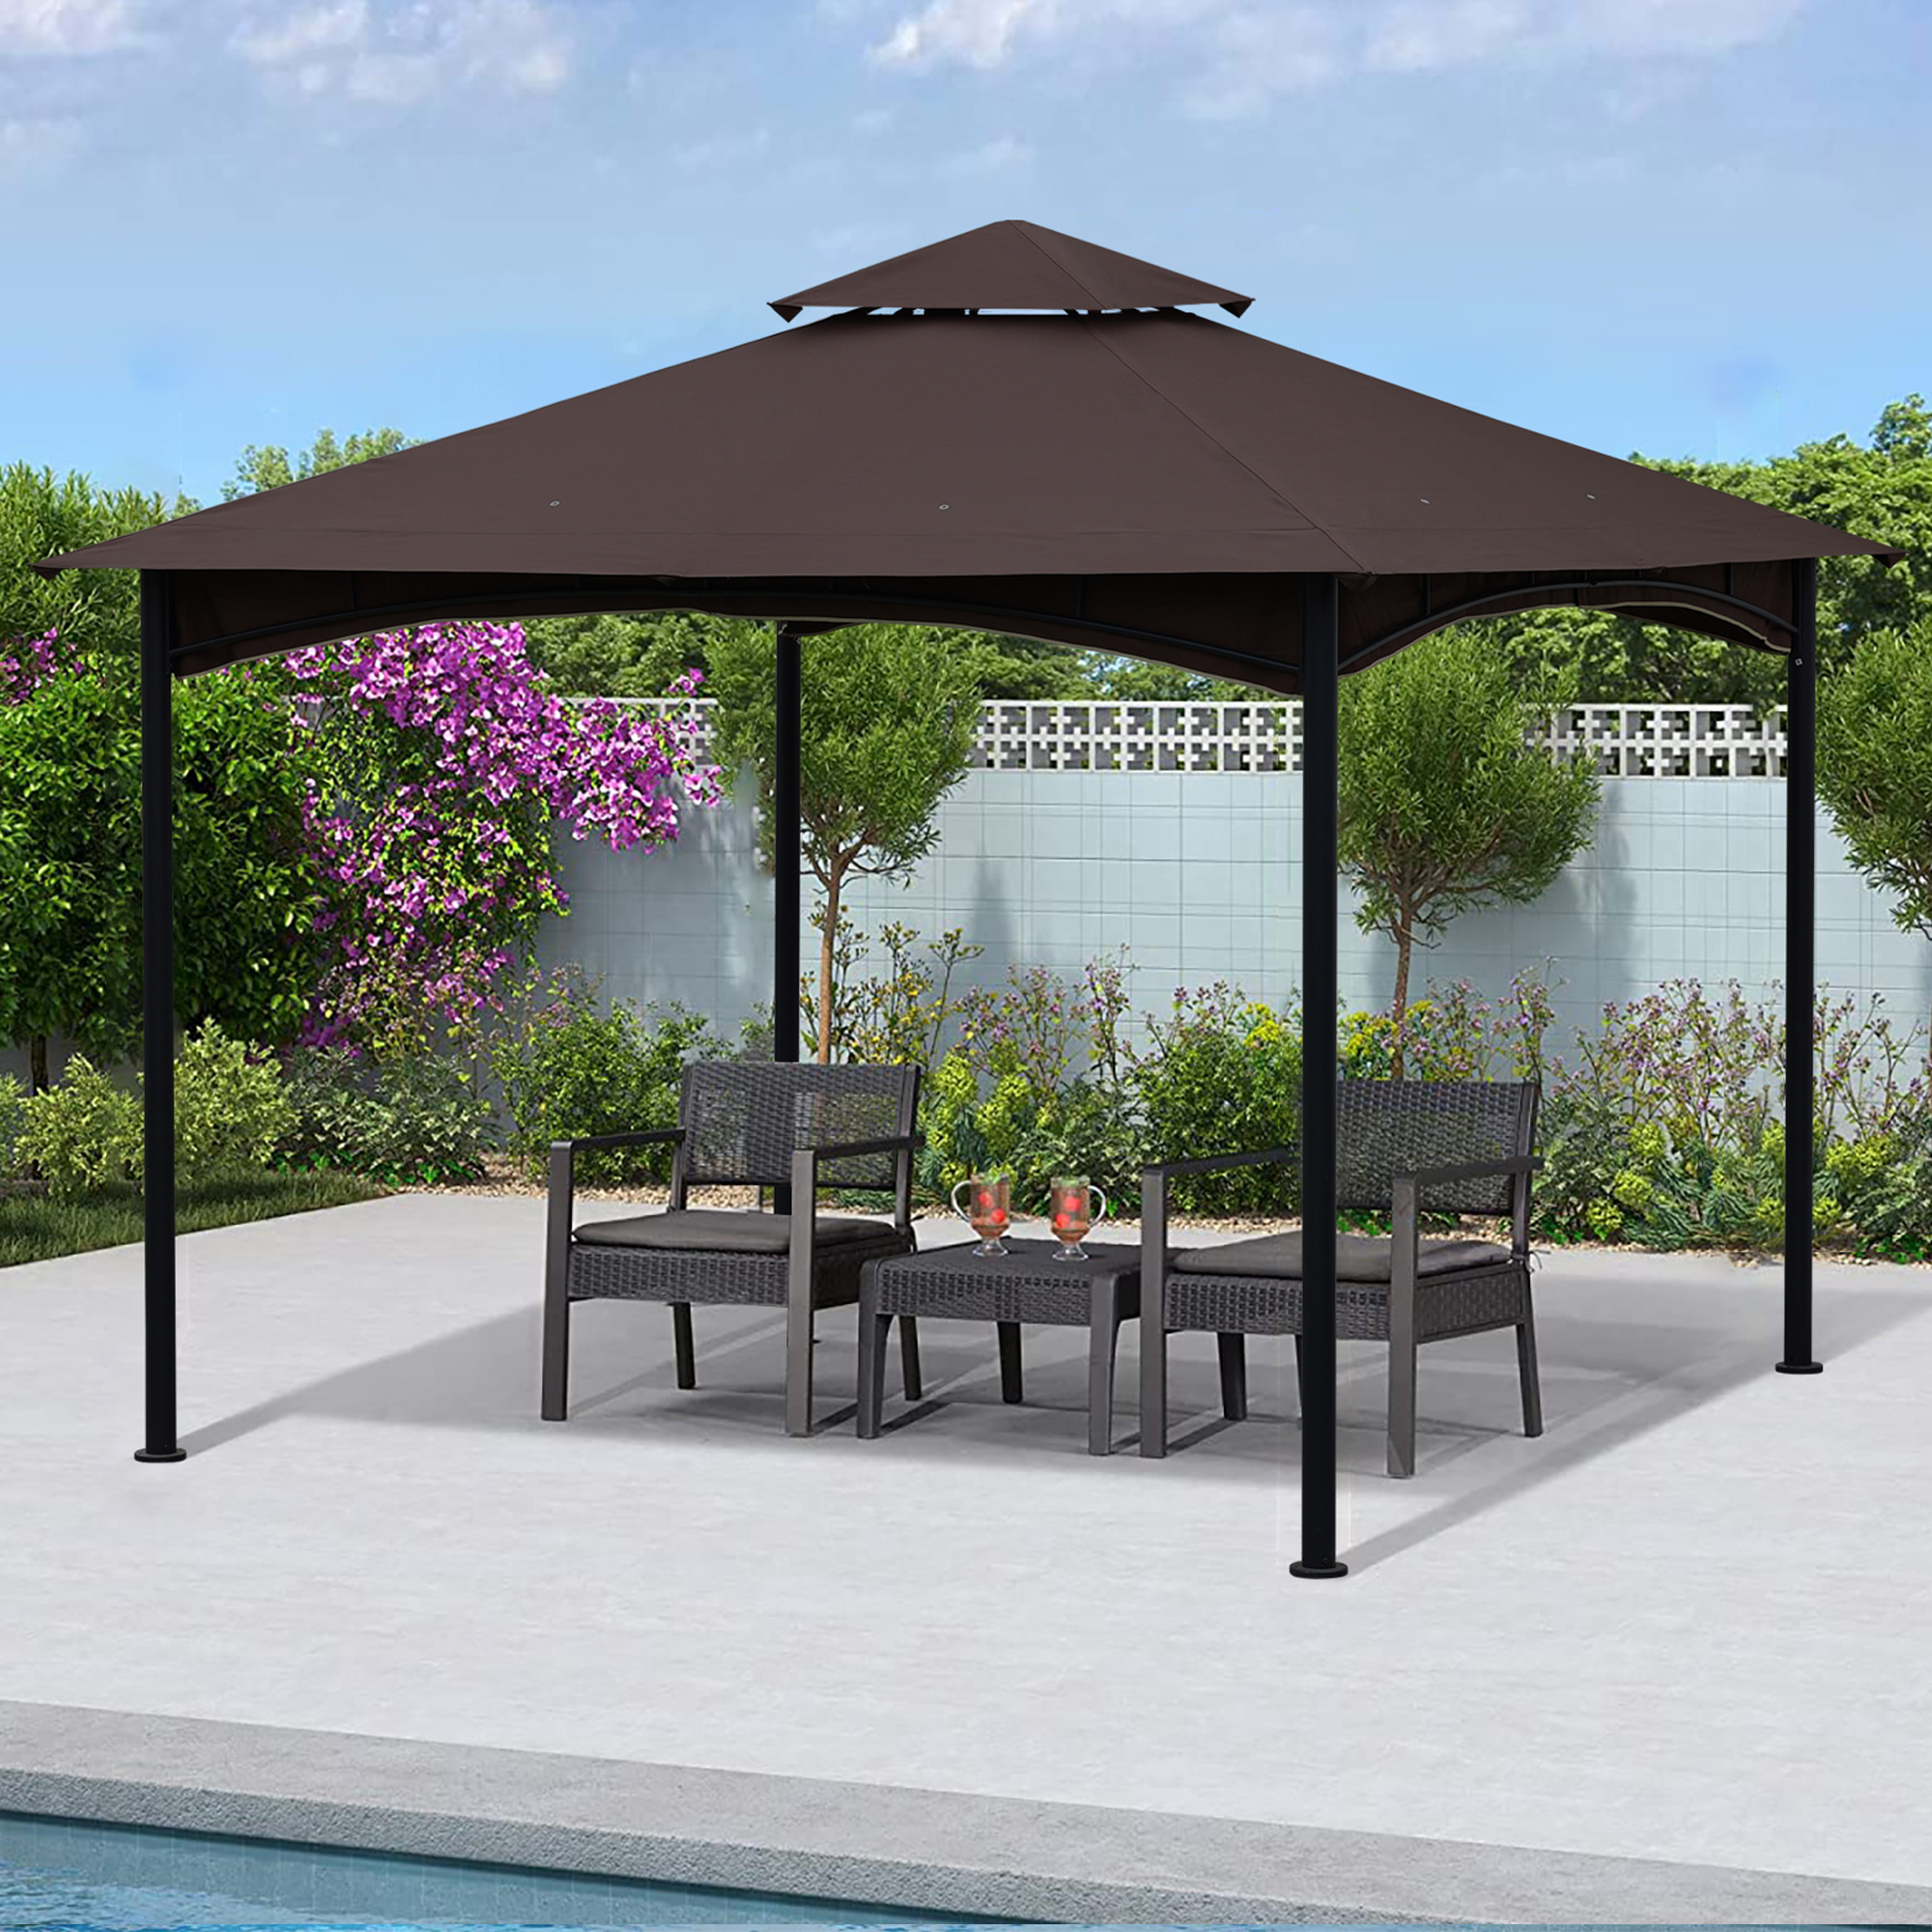 11x11 Ft Outdoor Patio Square Steel Gazebo Canopy With Double Roof for Lawn, Garden, Backyard-Boyel Living